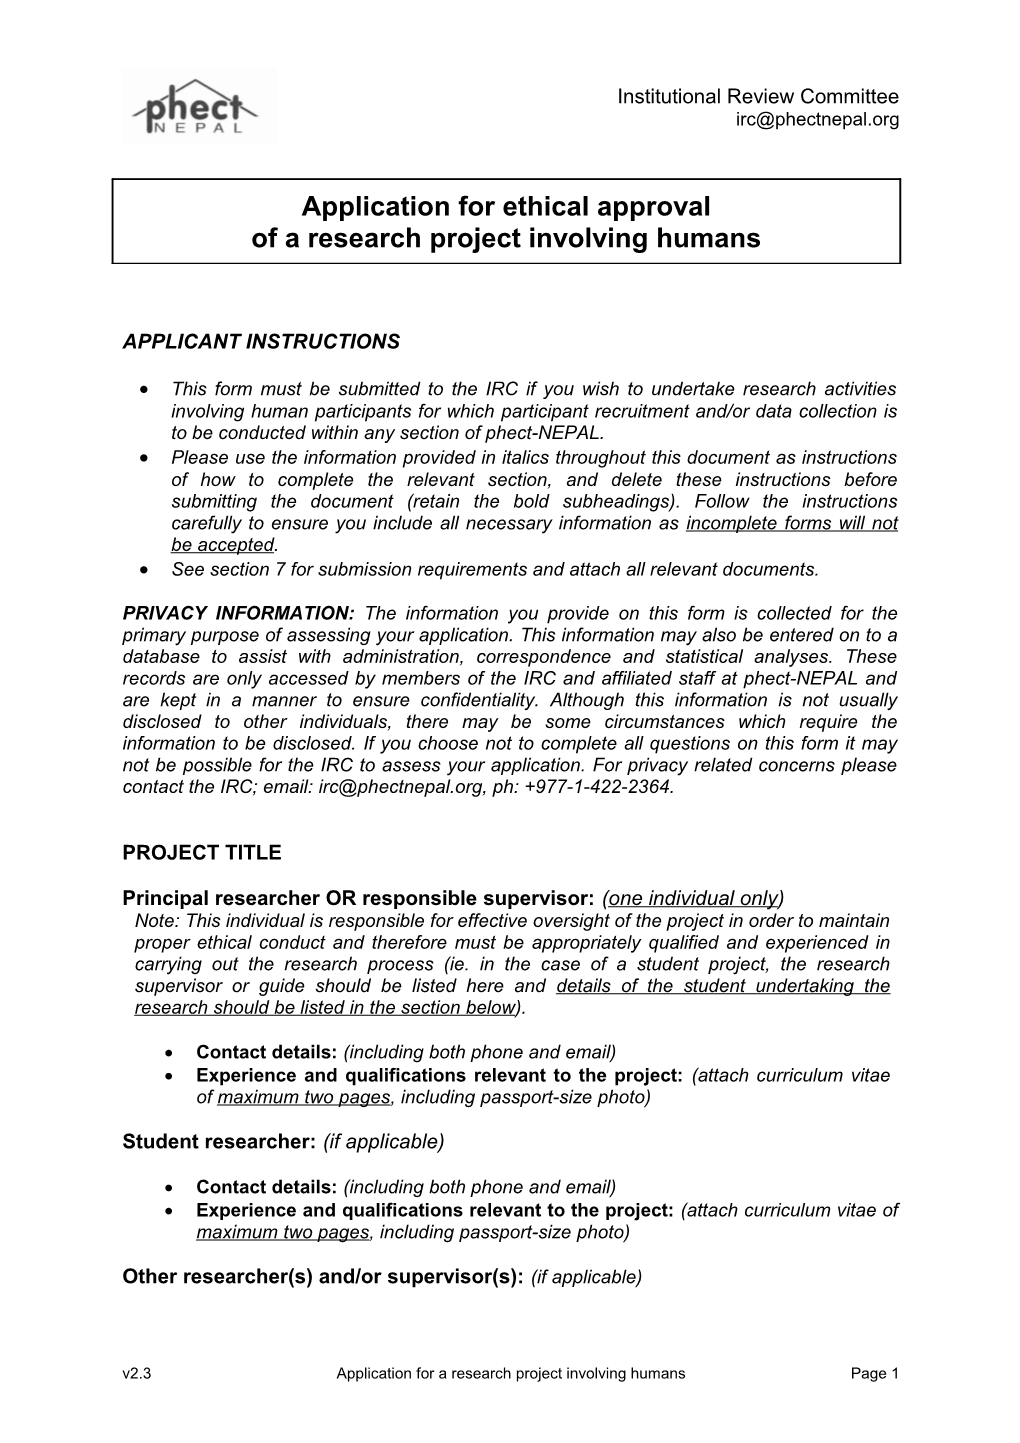 Application for Ethical Approval of a LOW RISK Project Involving Humans